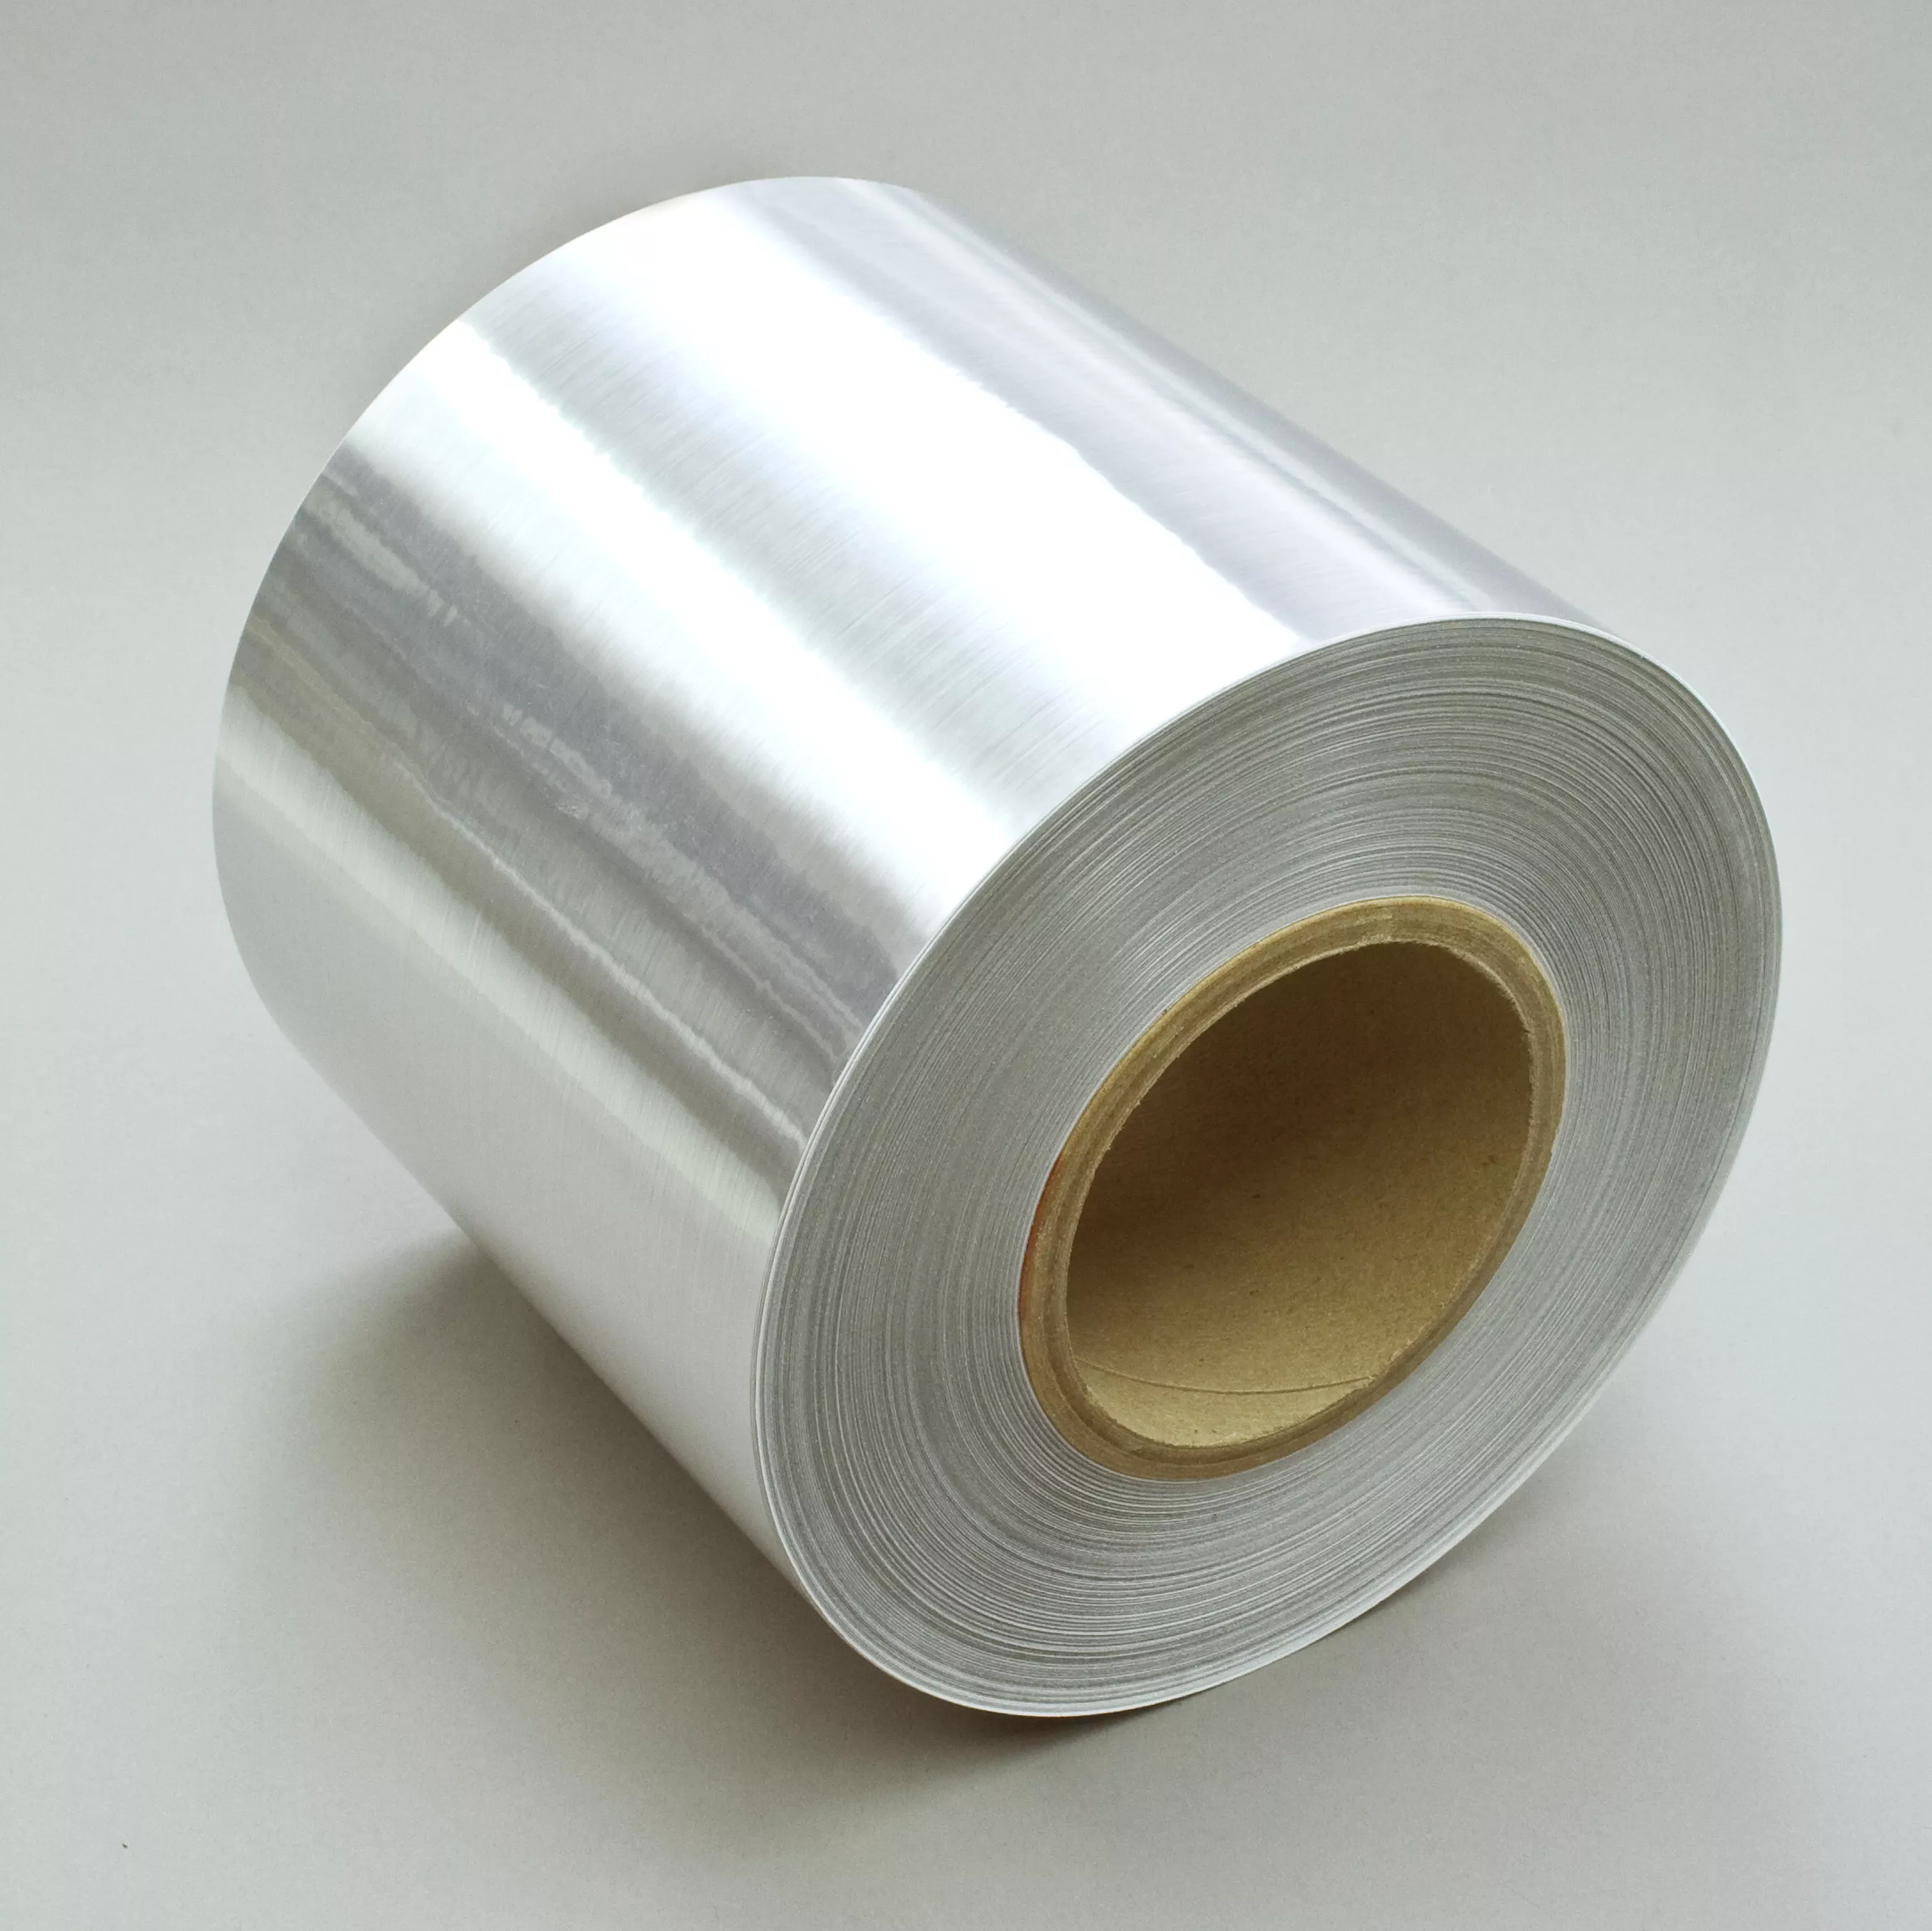 3M™ Sheet Label Material 7909L, Brushed Silver Polyester, 508 mm x 686 mm, 100 Sheet/Case